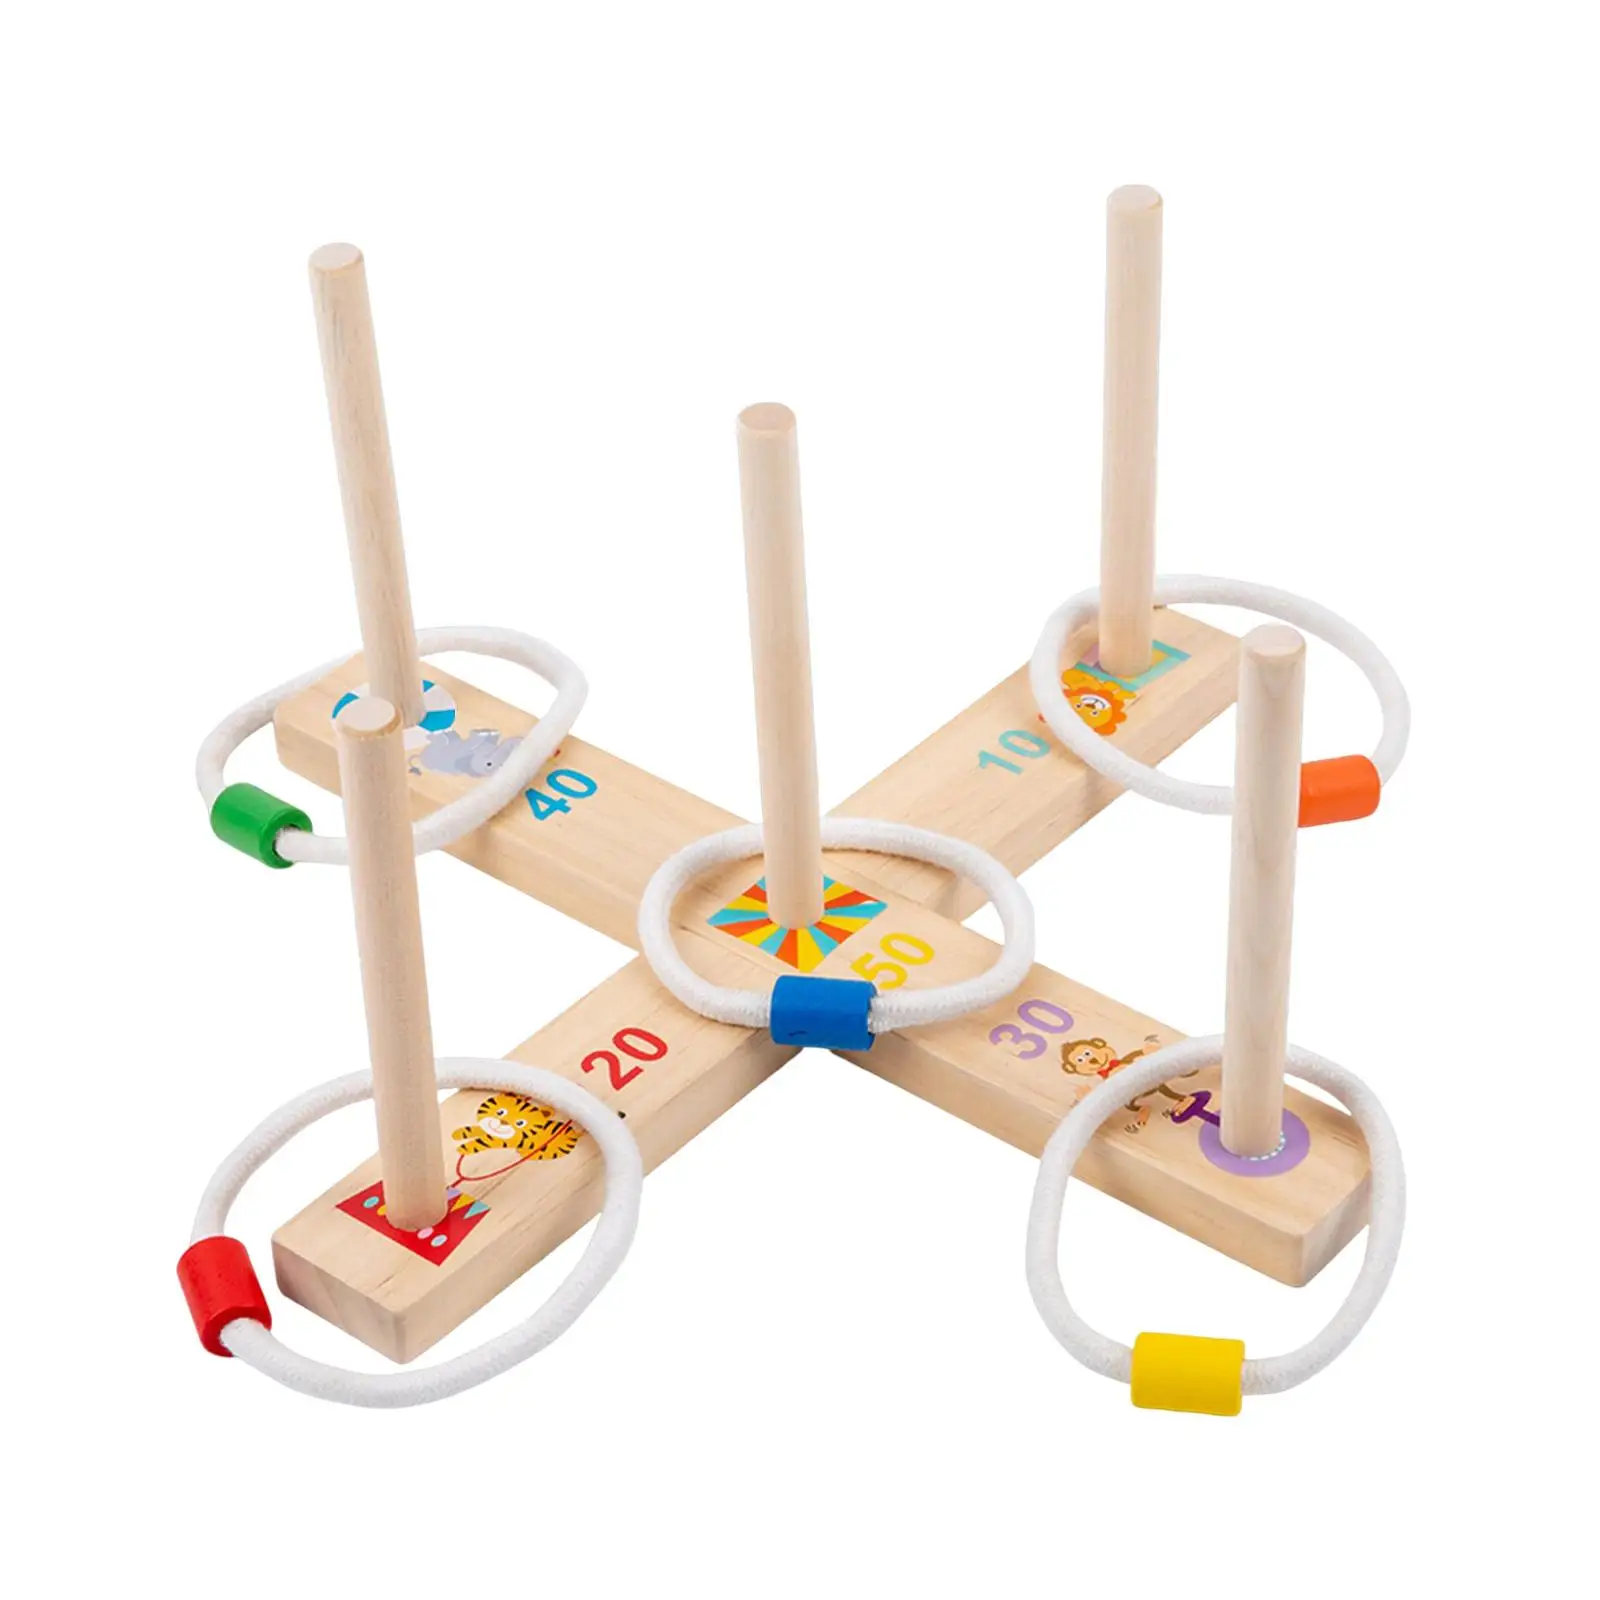 Wood Ferrule Game Puzzle Toy Ring Toss Montessori Educational for Children